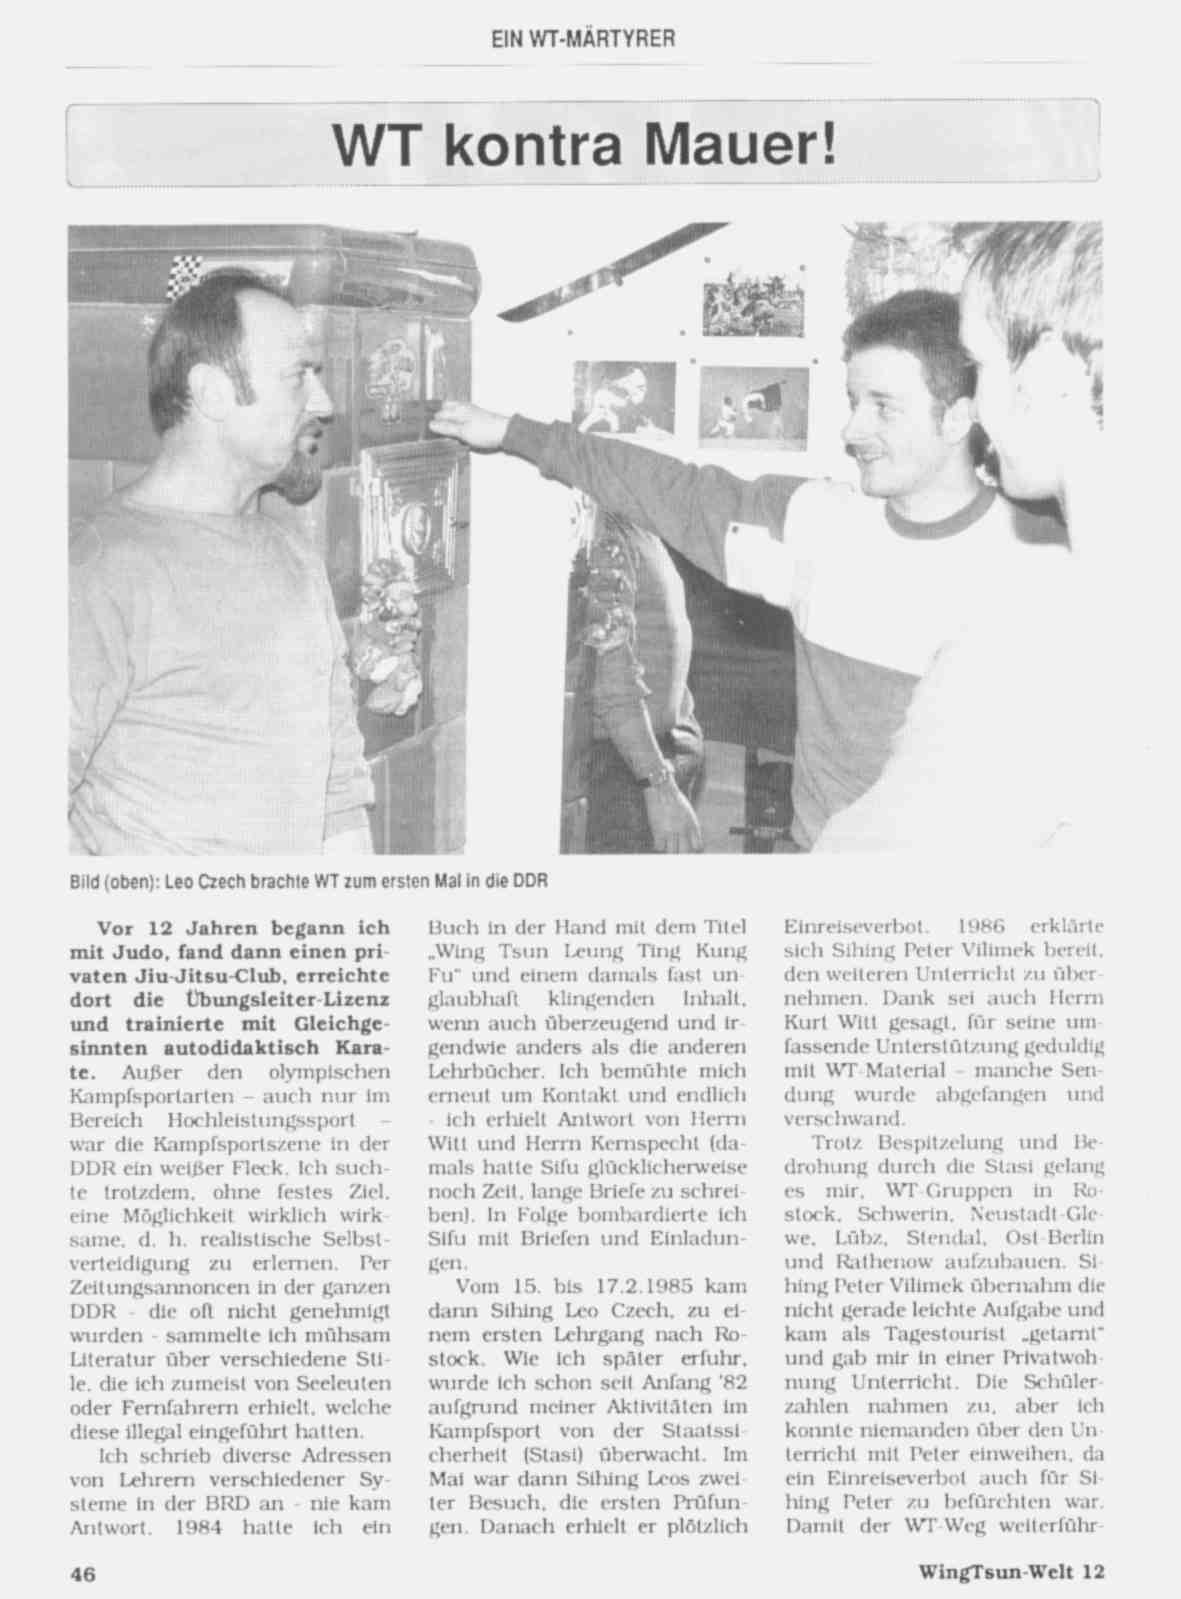 Click to view larger image, wing tsun welt magazin 12, 1991